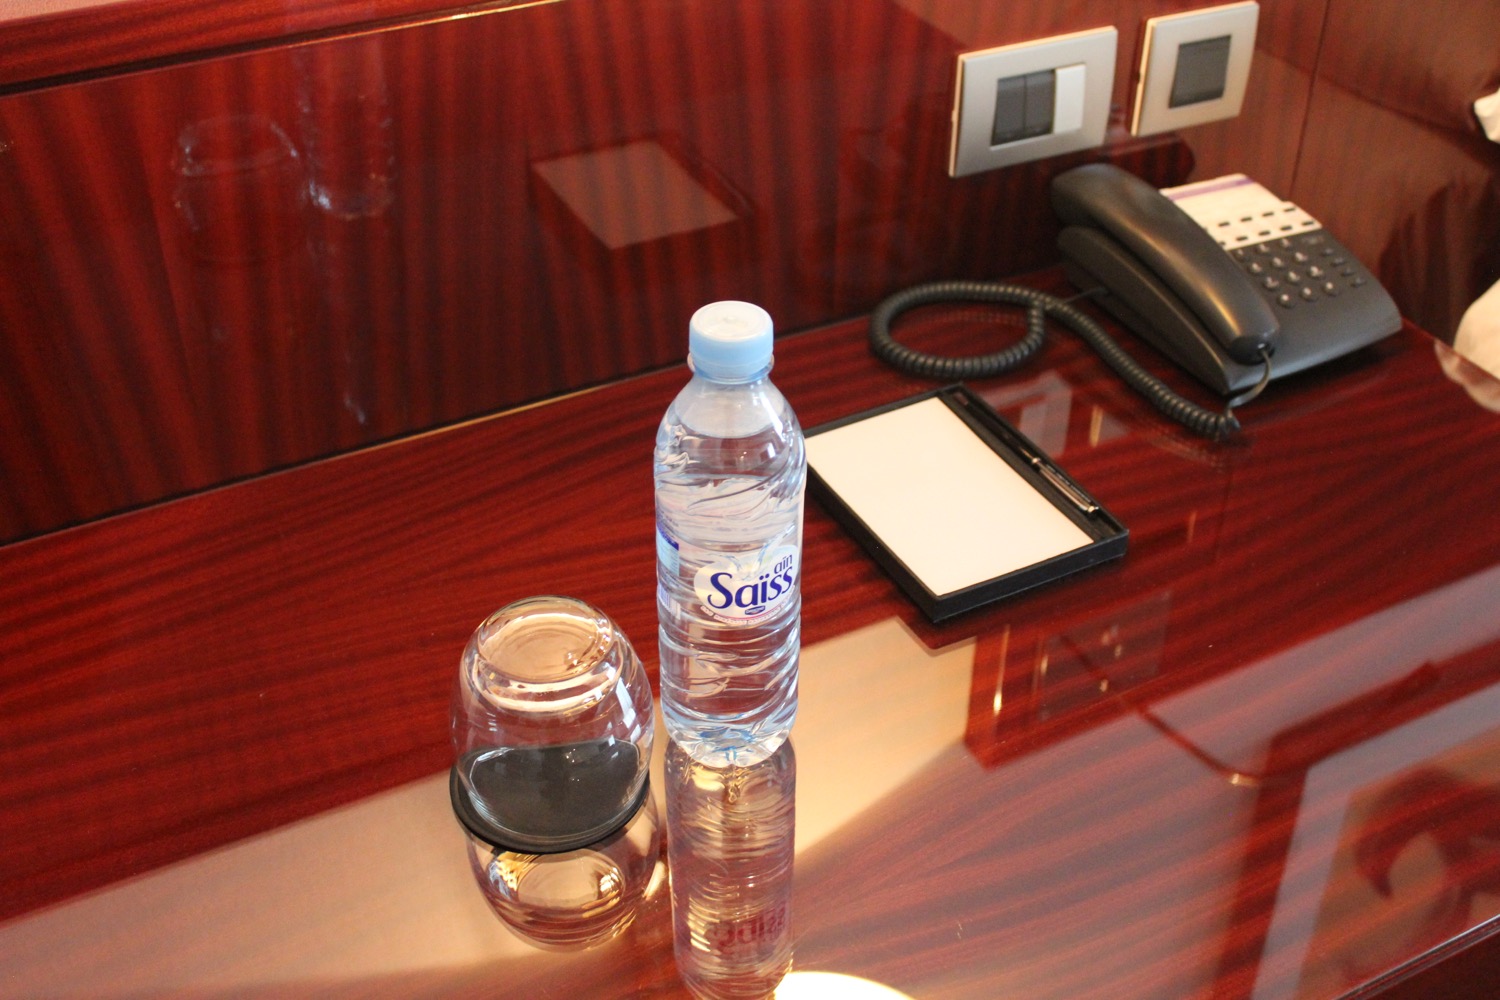 a bottle of water and a glass on a desk